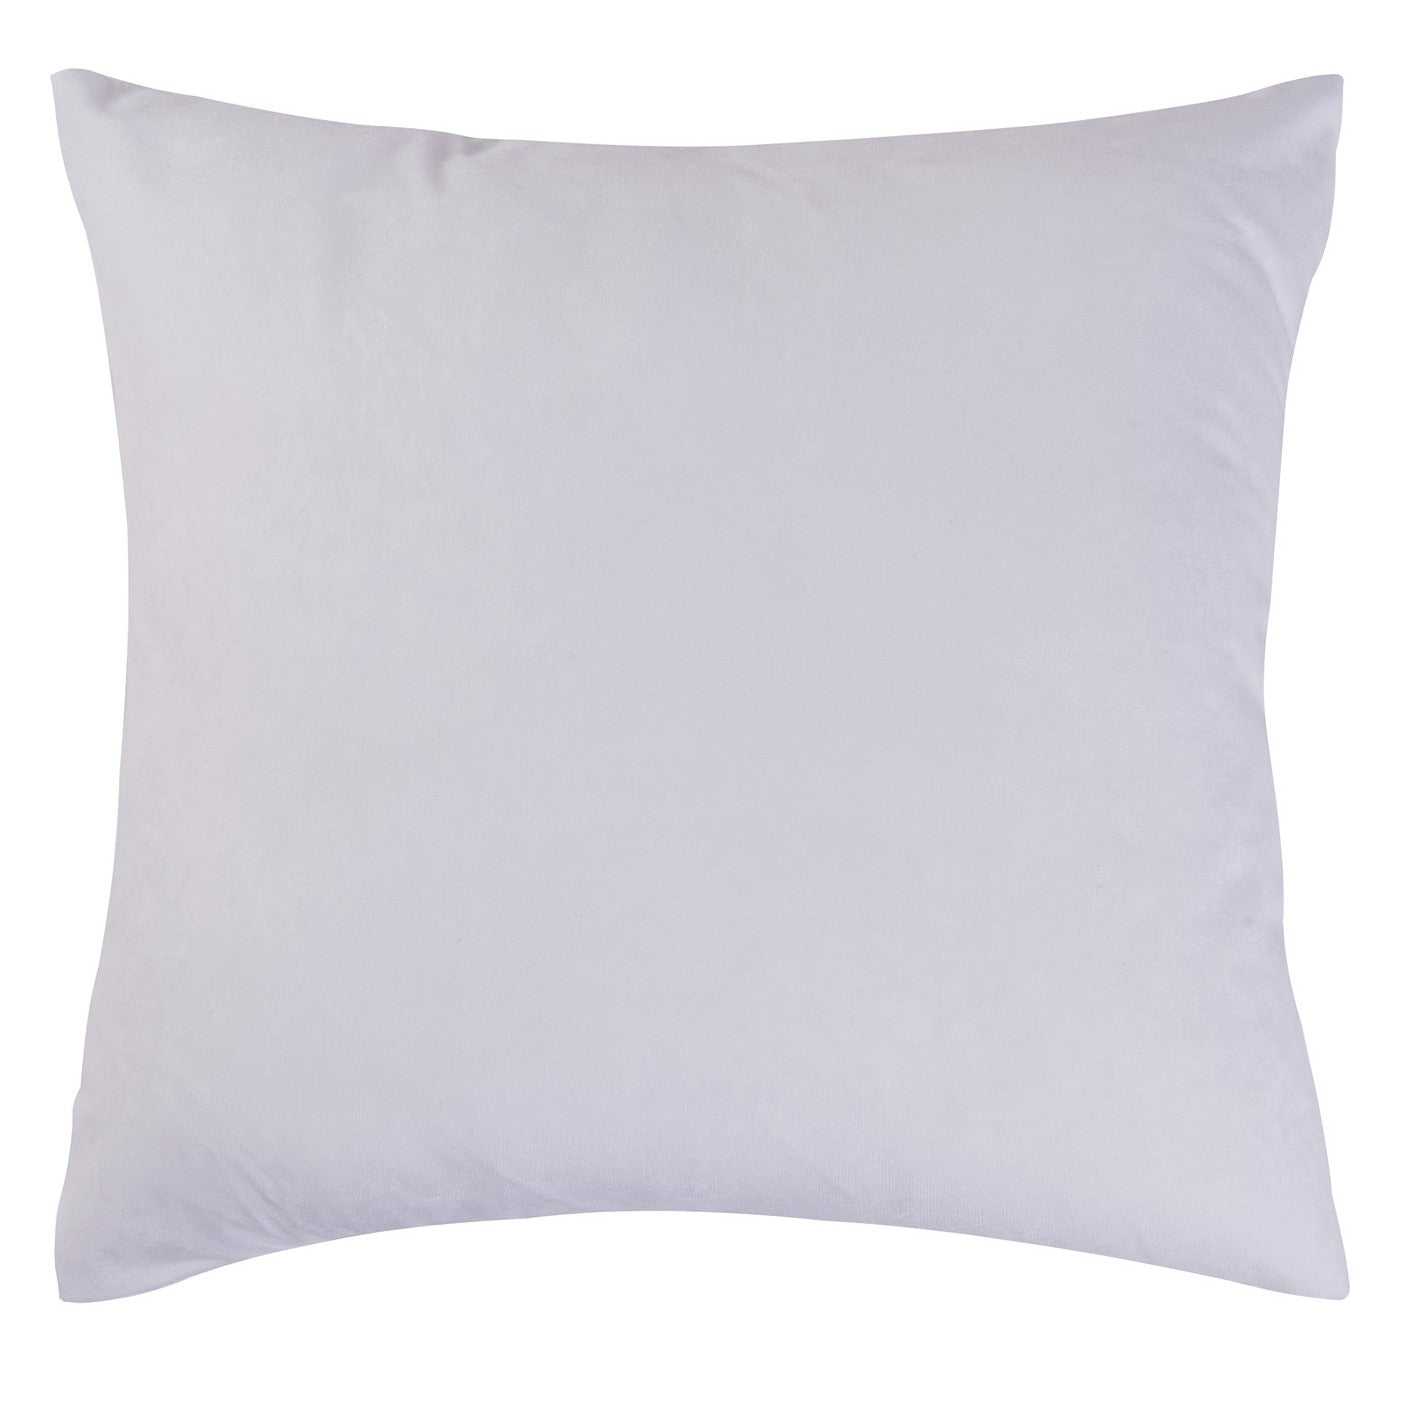 Design Your Own Cushions | Dropshippers UK No Minimum Order